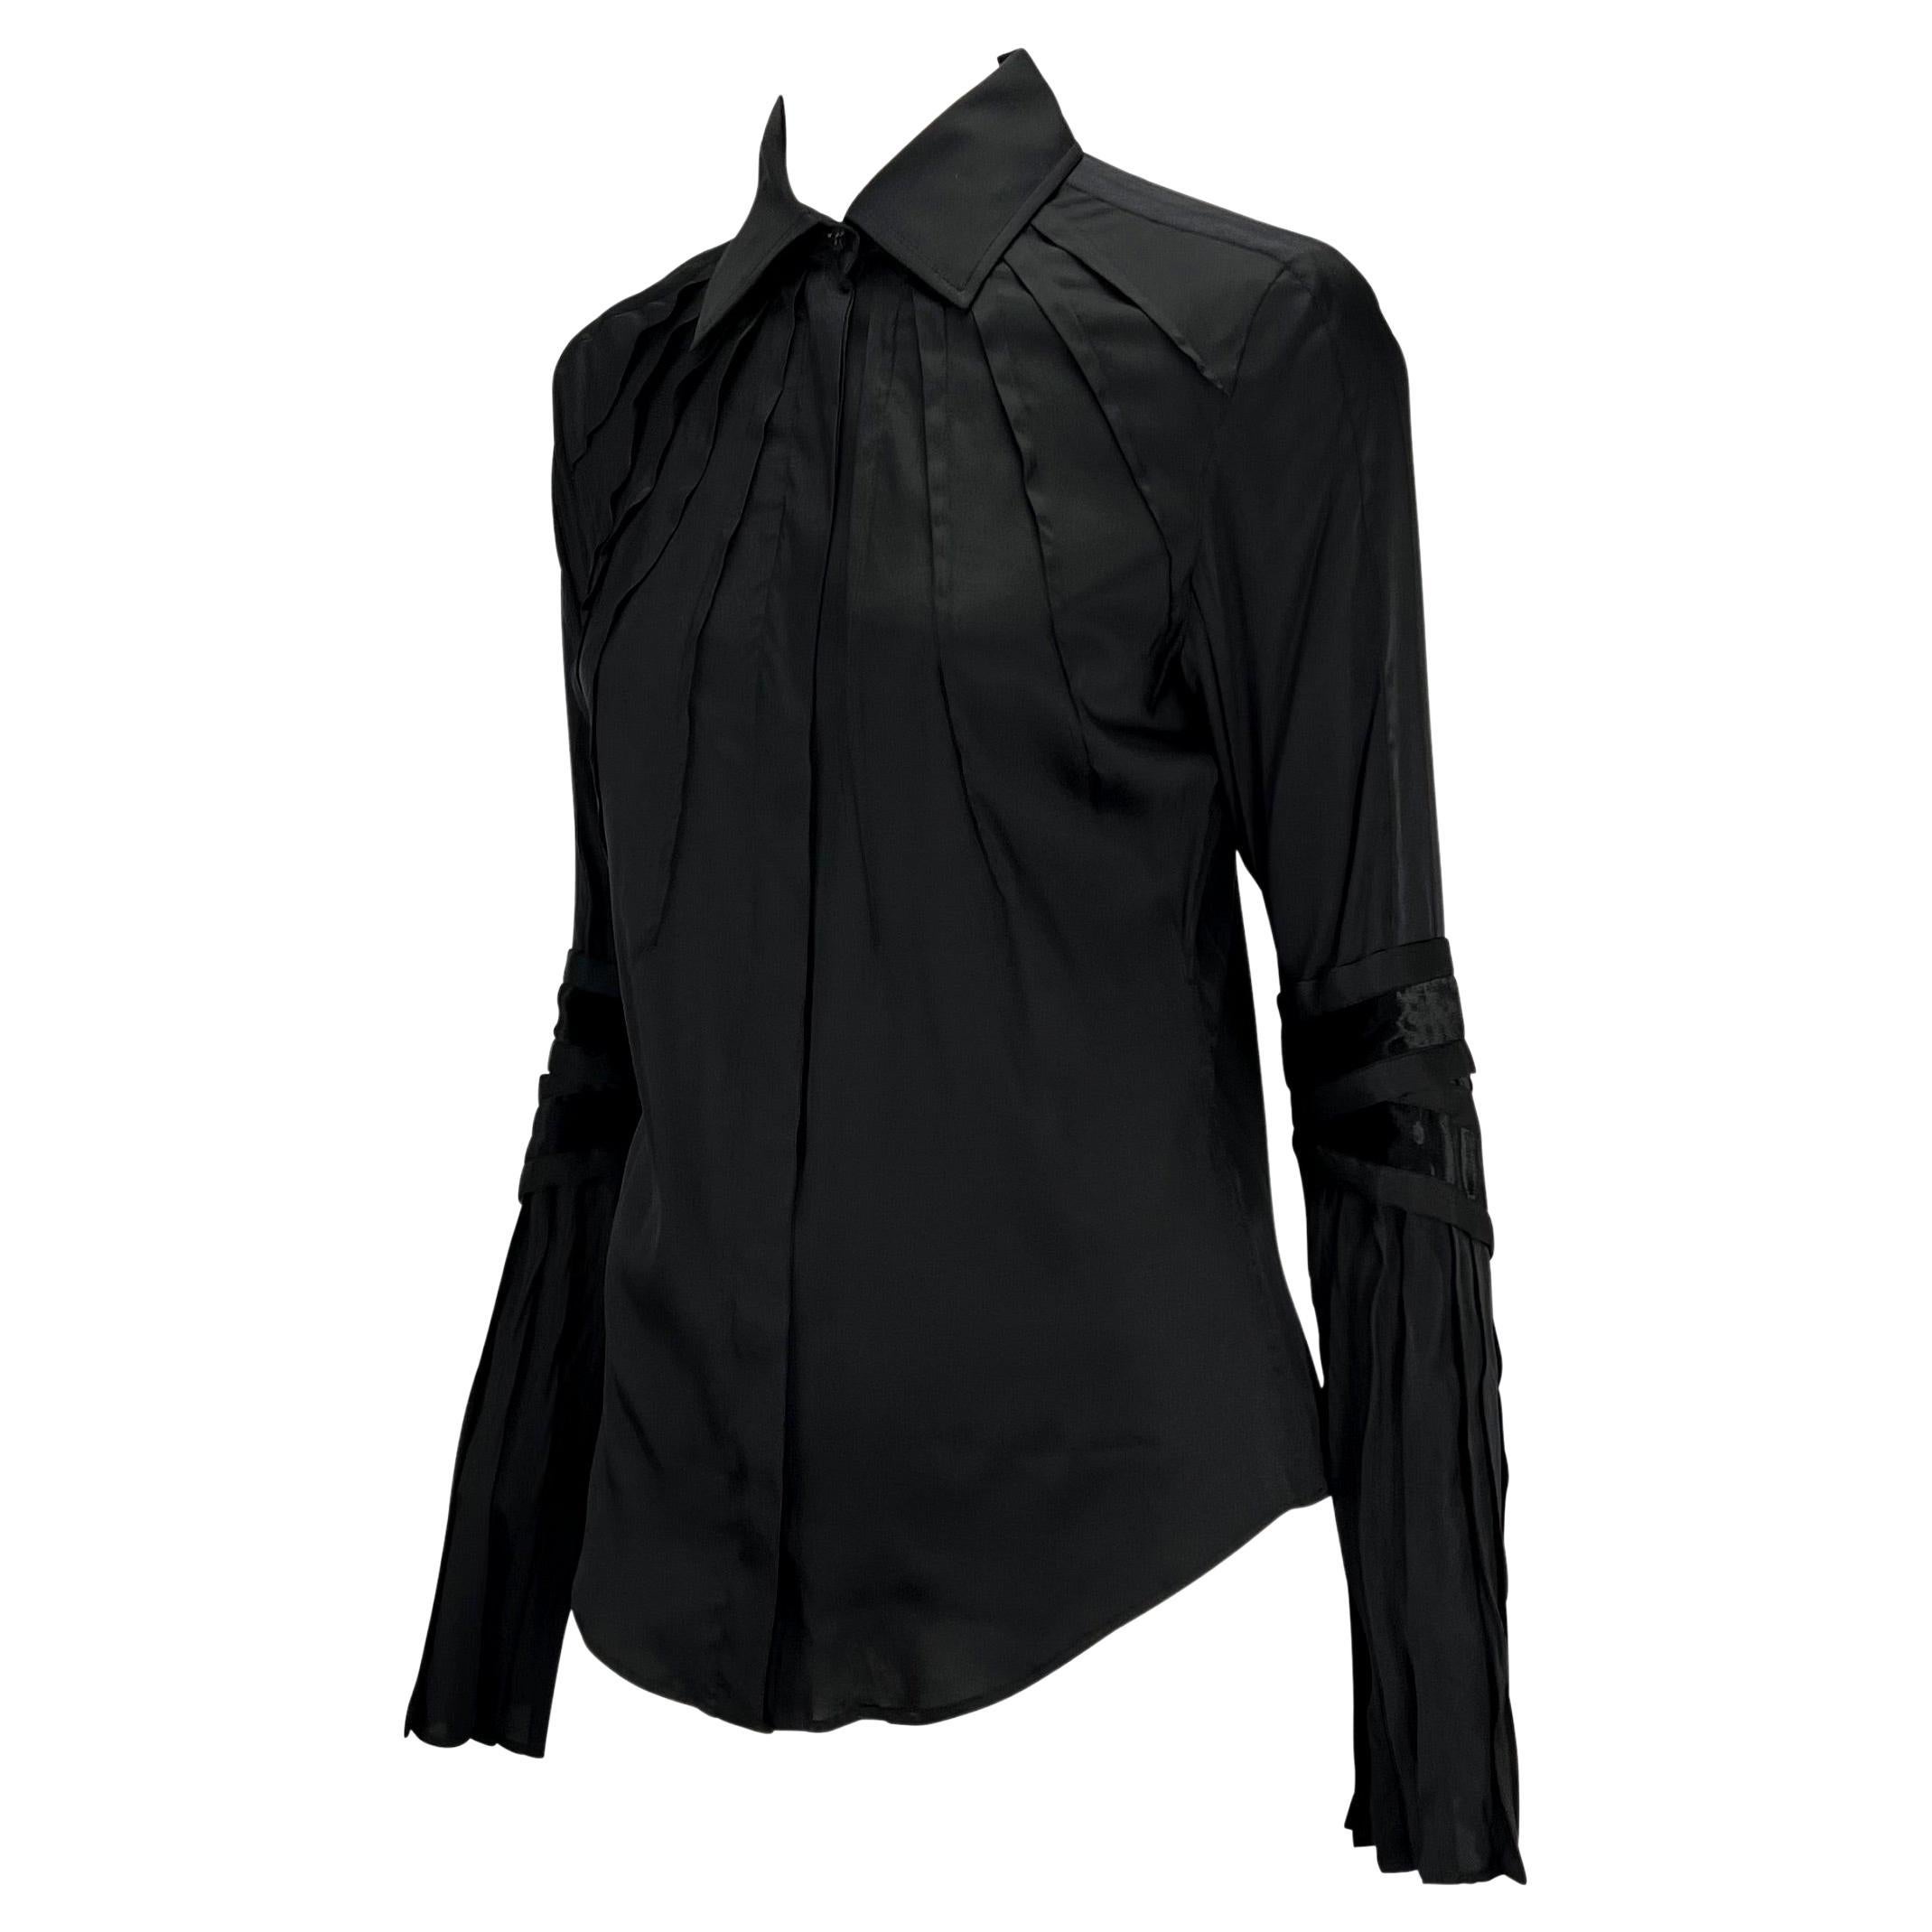 Presenting a black silk button-up Gucci shirt, designed by Tom Ford. From the Fall/Winter 2004 collection, this incredible piece is constructed of a silk-spandex blend and features pleats that jut from the neckline and elbow. The blouse is made